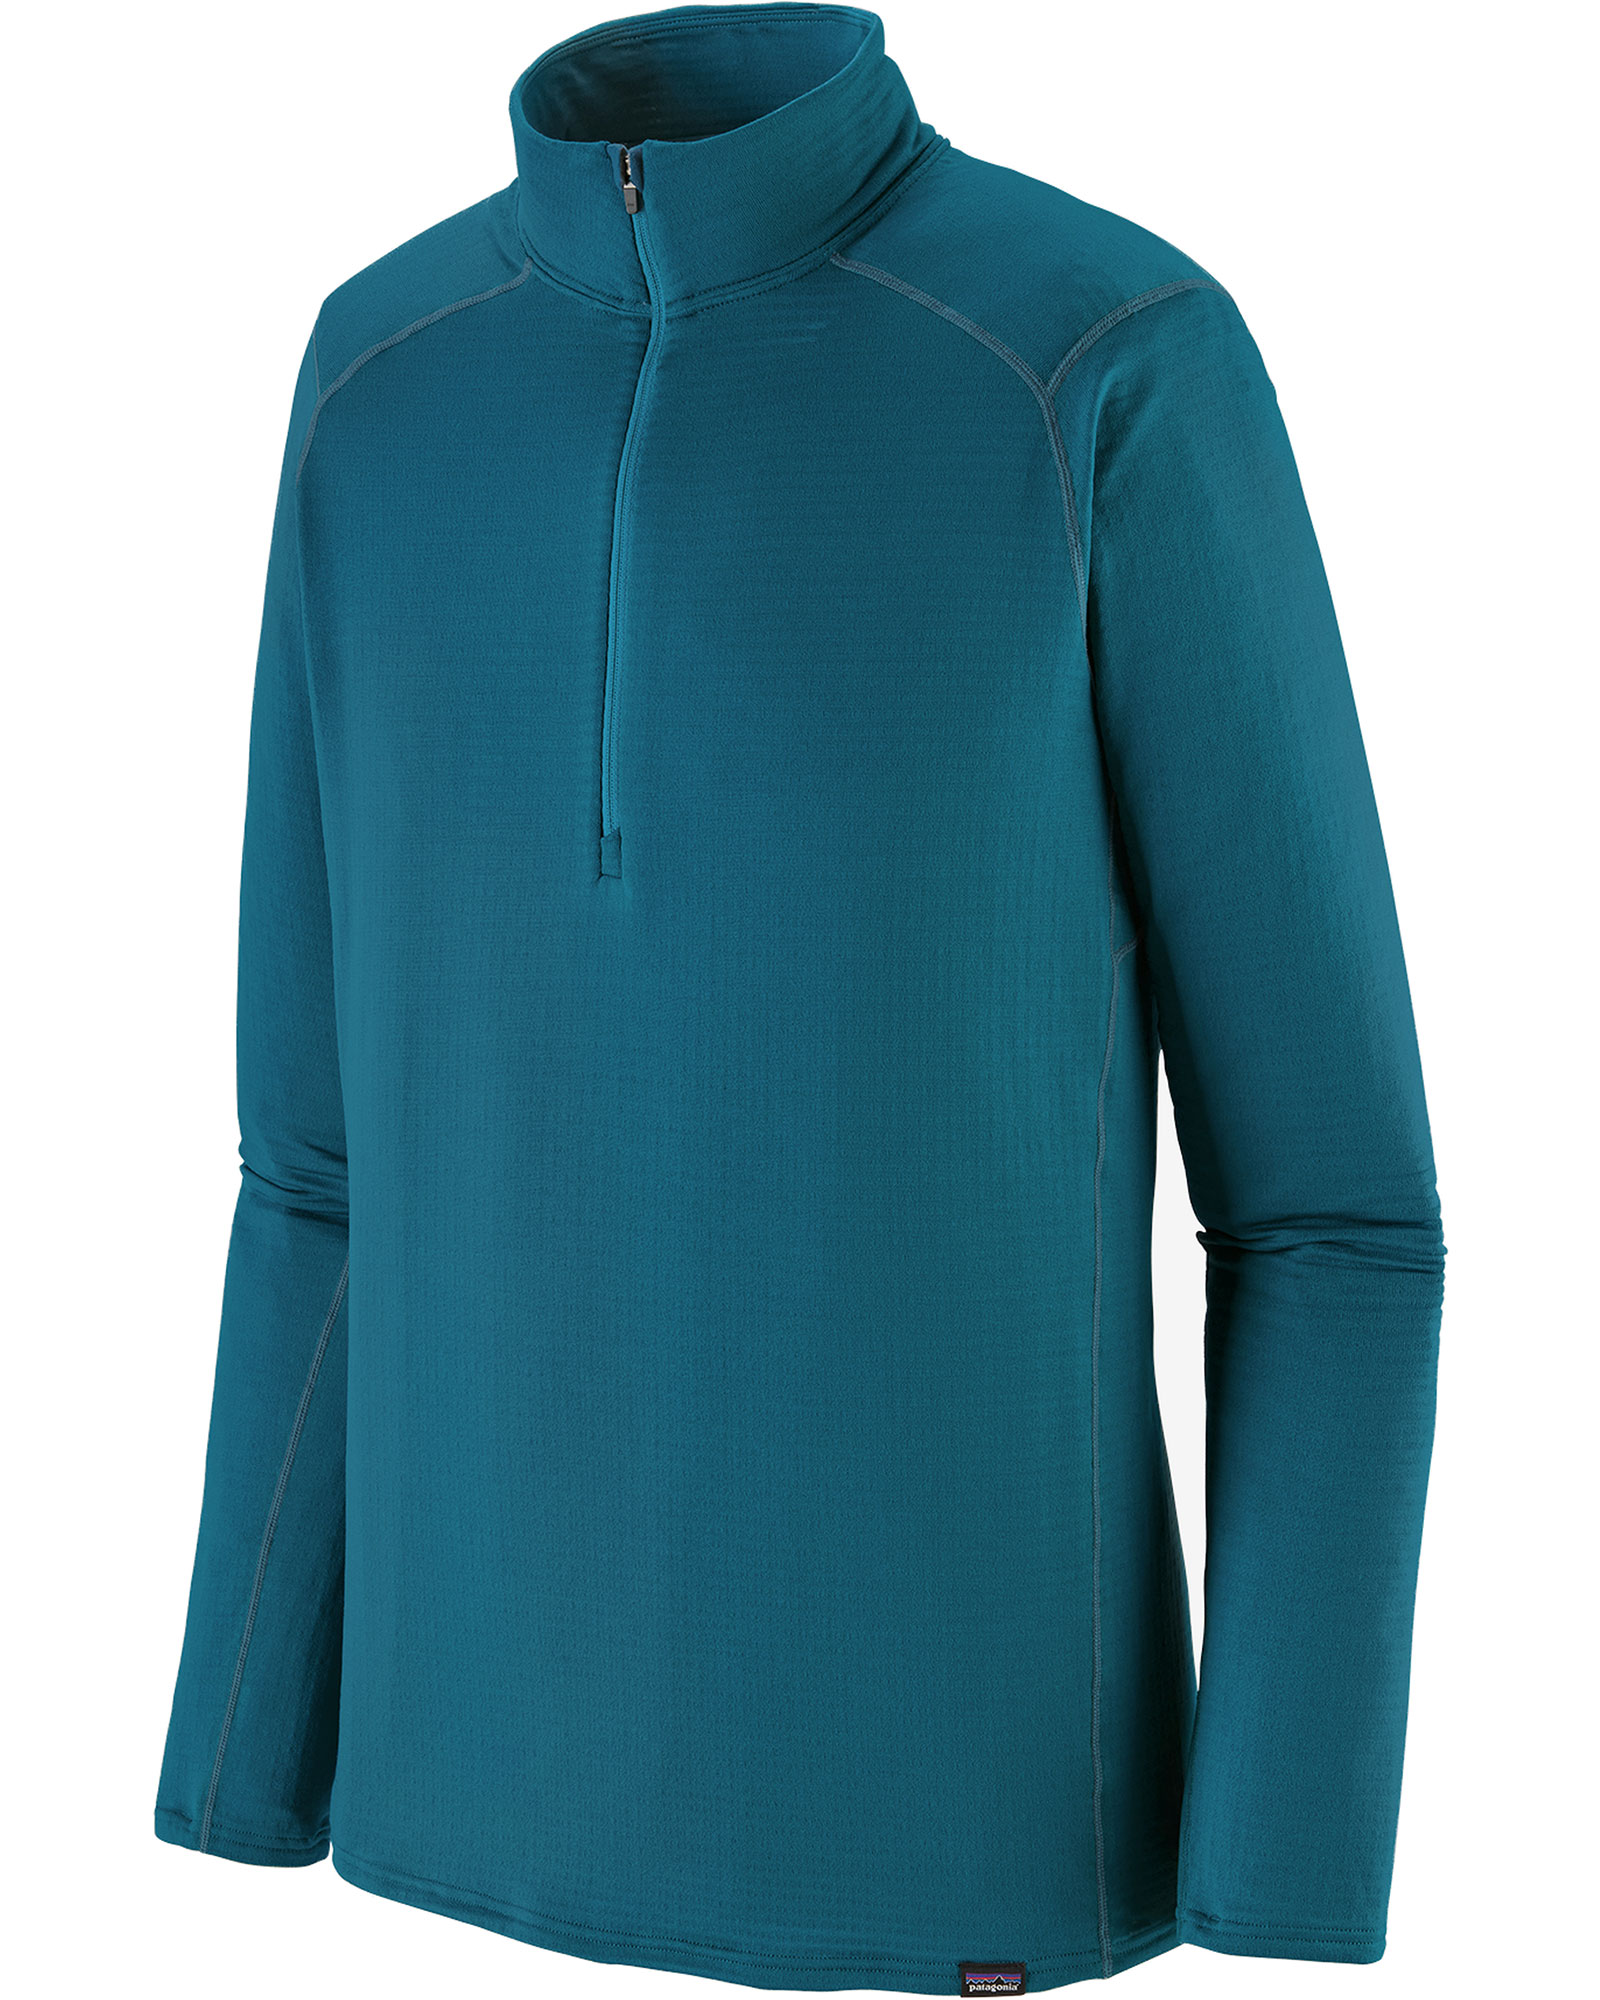 Product image of Patagonia Capilene Thermal Weight Men's Zip Neck